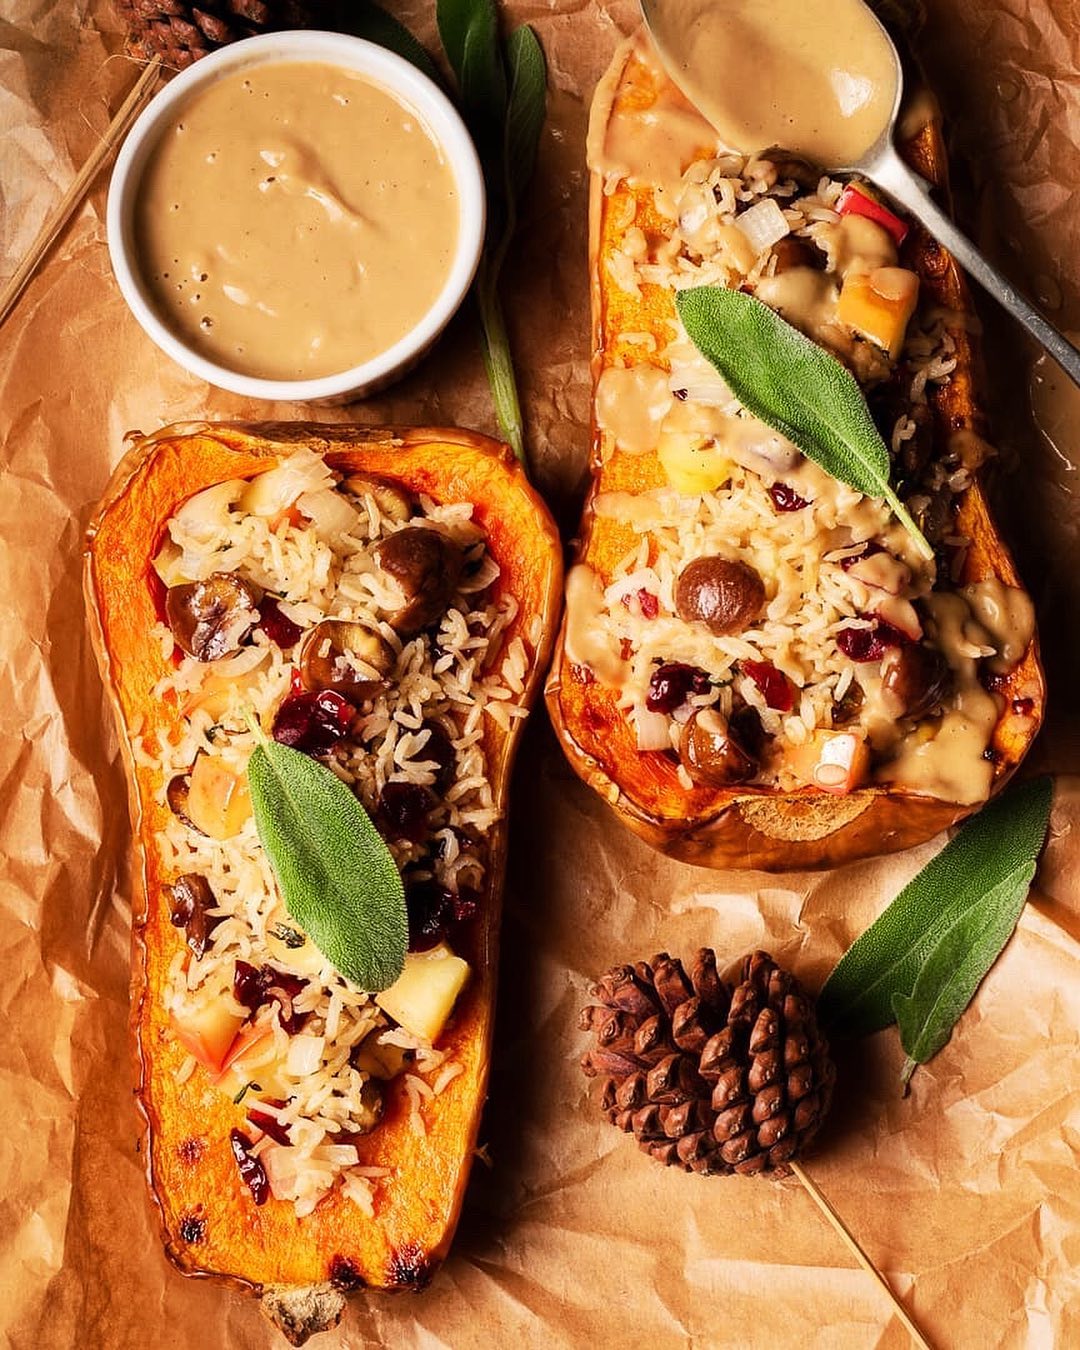 Roasted Butternut Squash with a Cranberry, Apple and Chestnut Stuffing